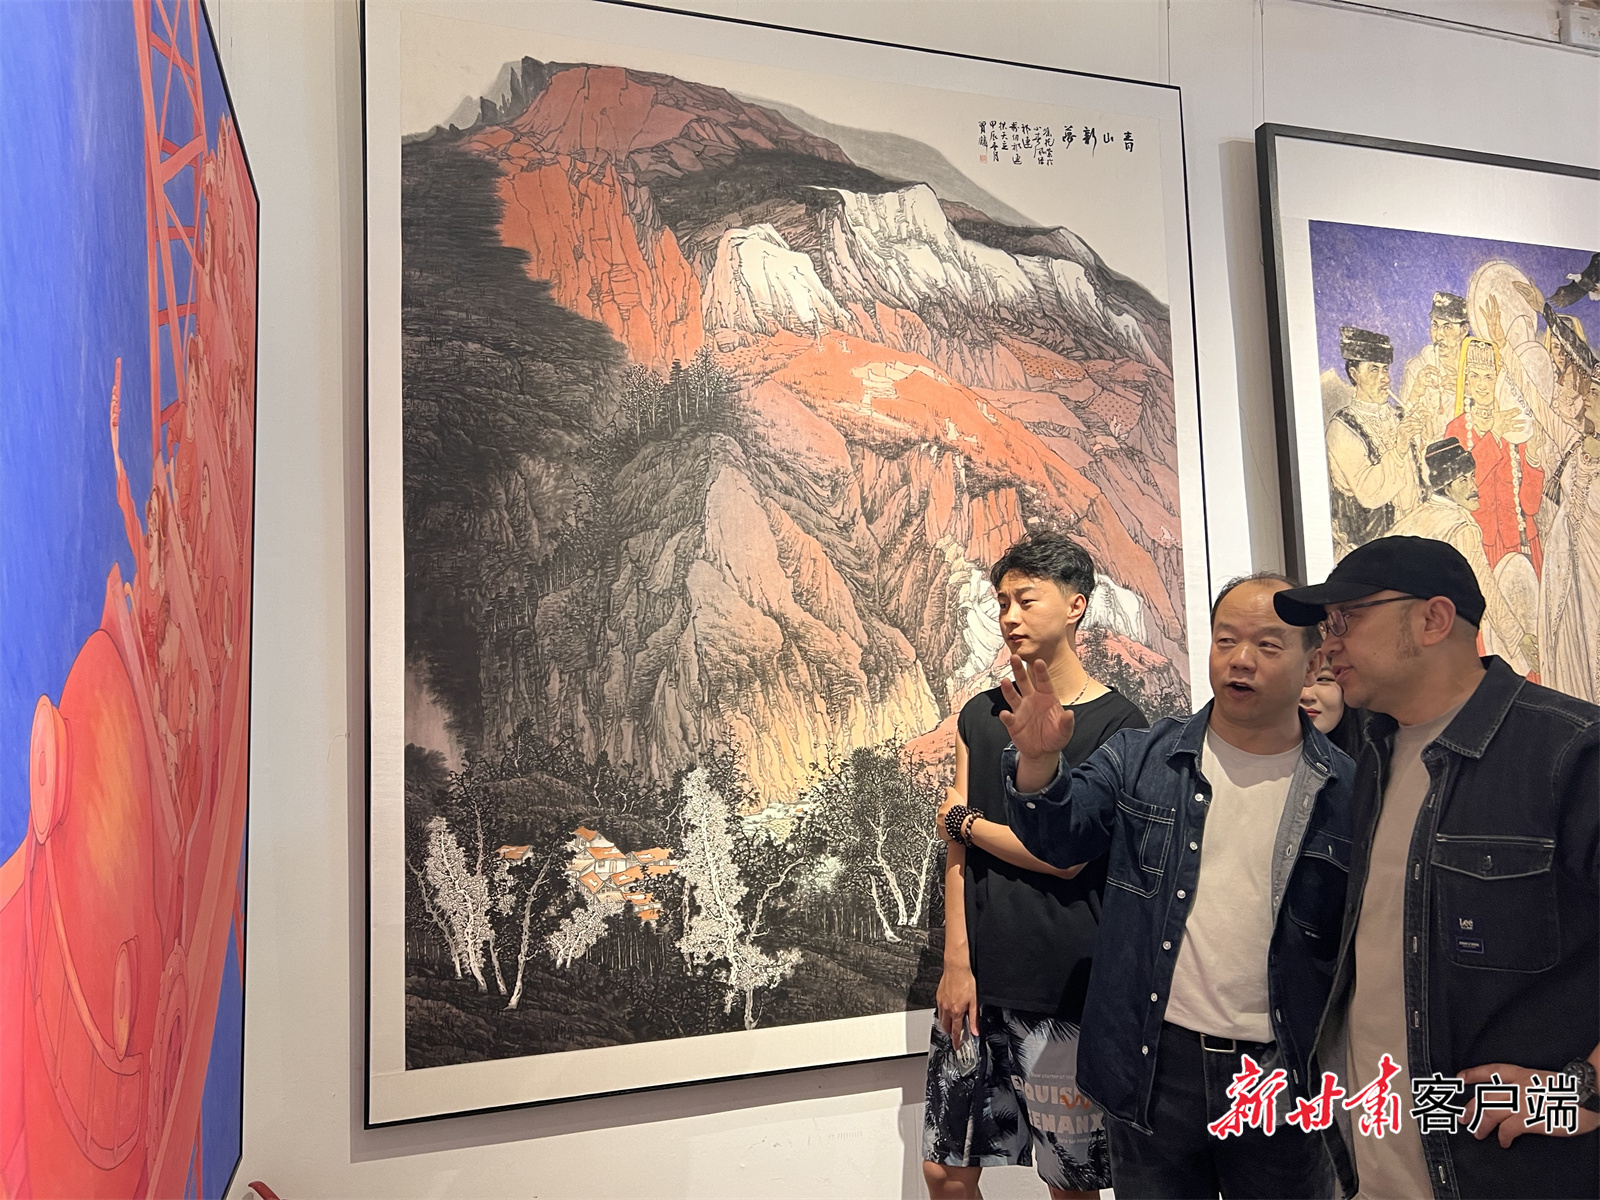  "The 14th National Exhibition of Fine Arts - Gansu Selection Exhibition of Chinese Painting and Oil Painting Works" opened in Lanzhou